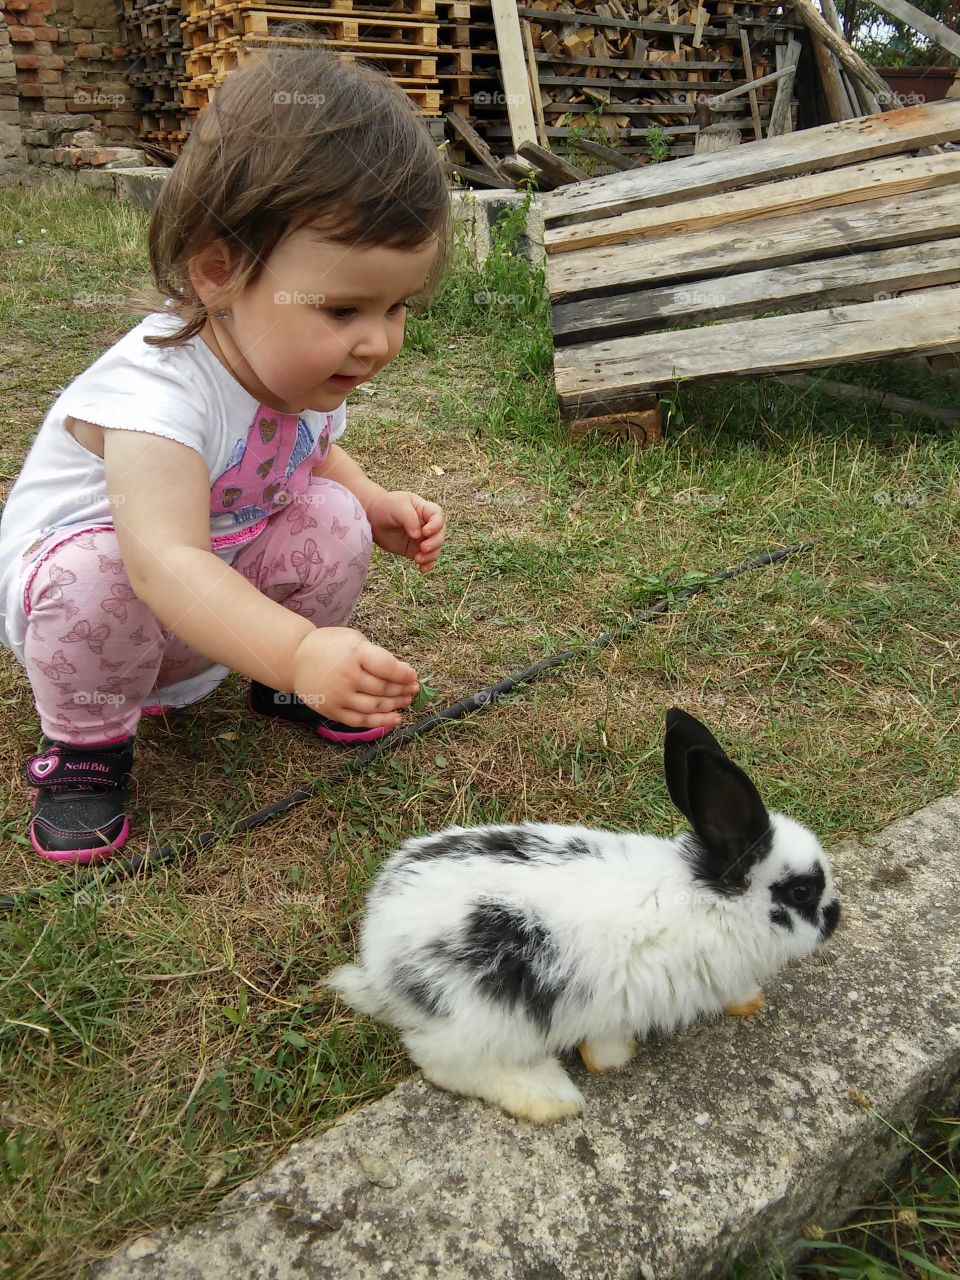 Bunny and the baby